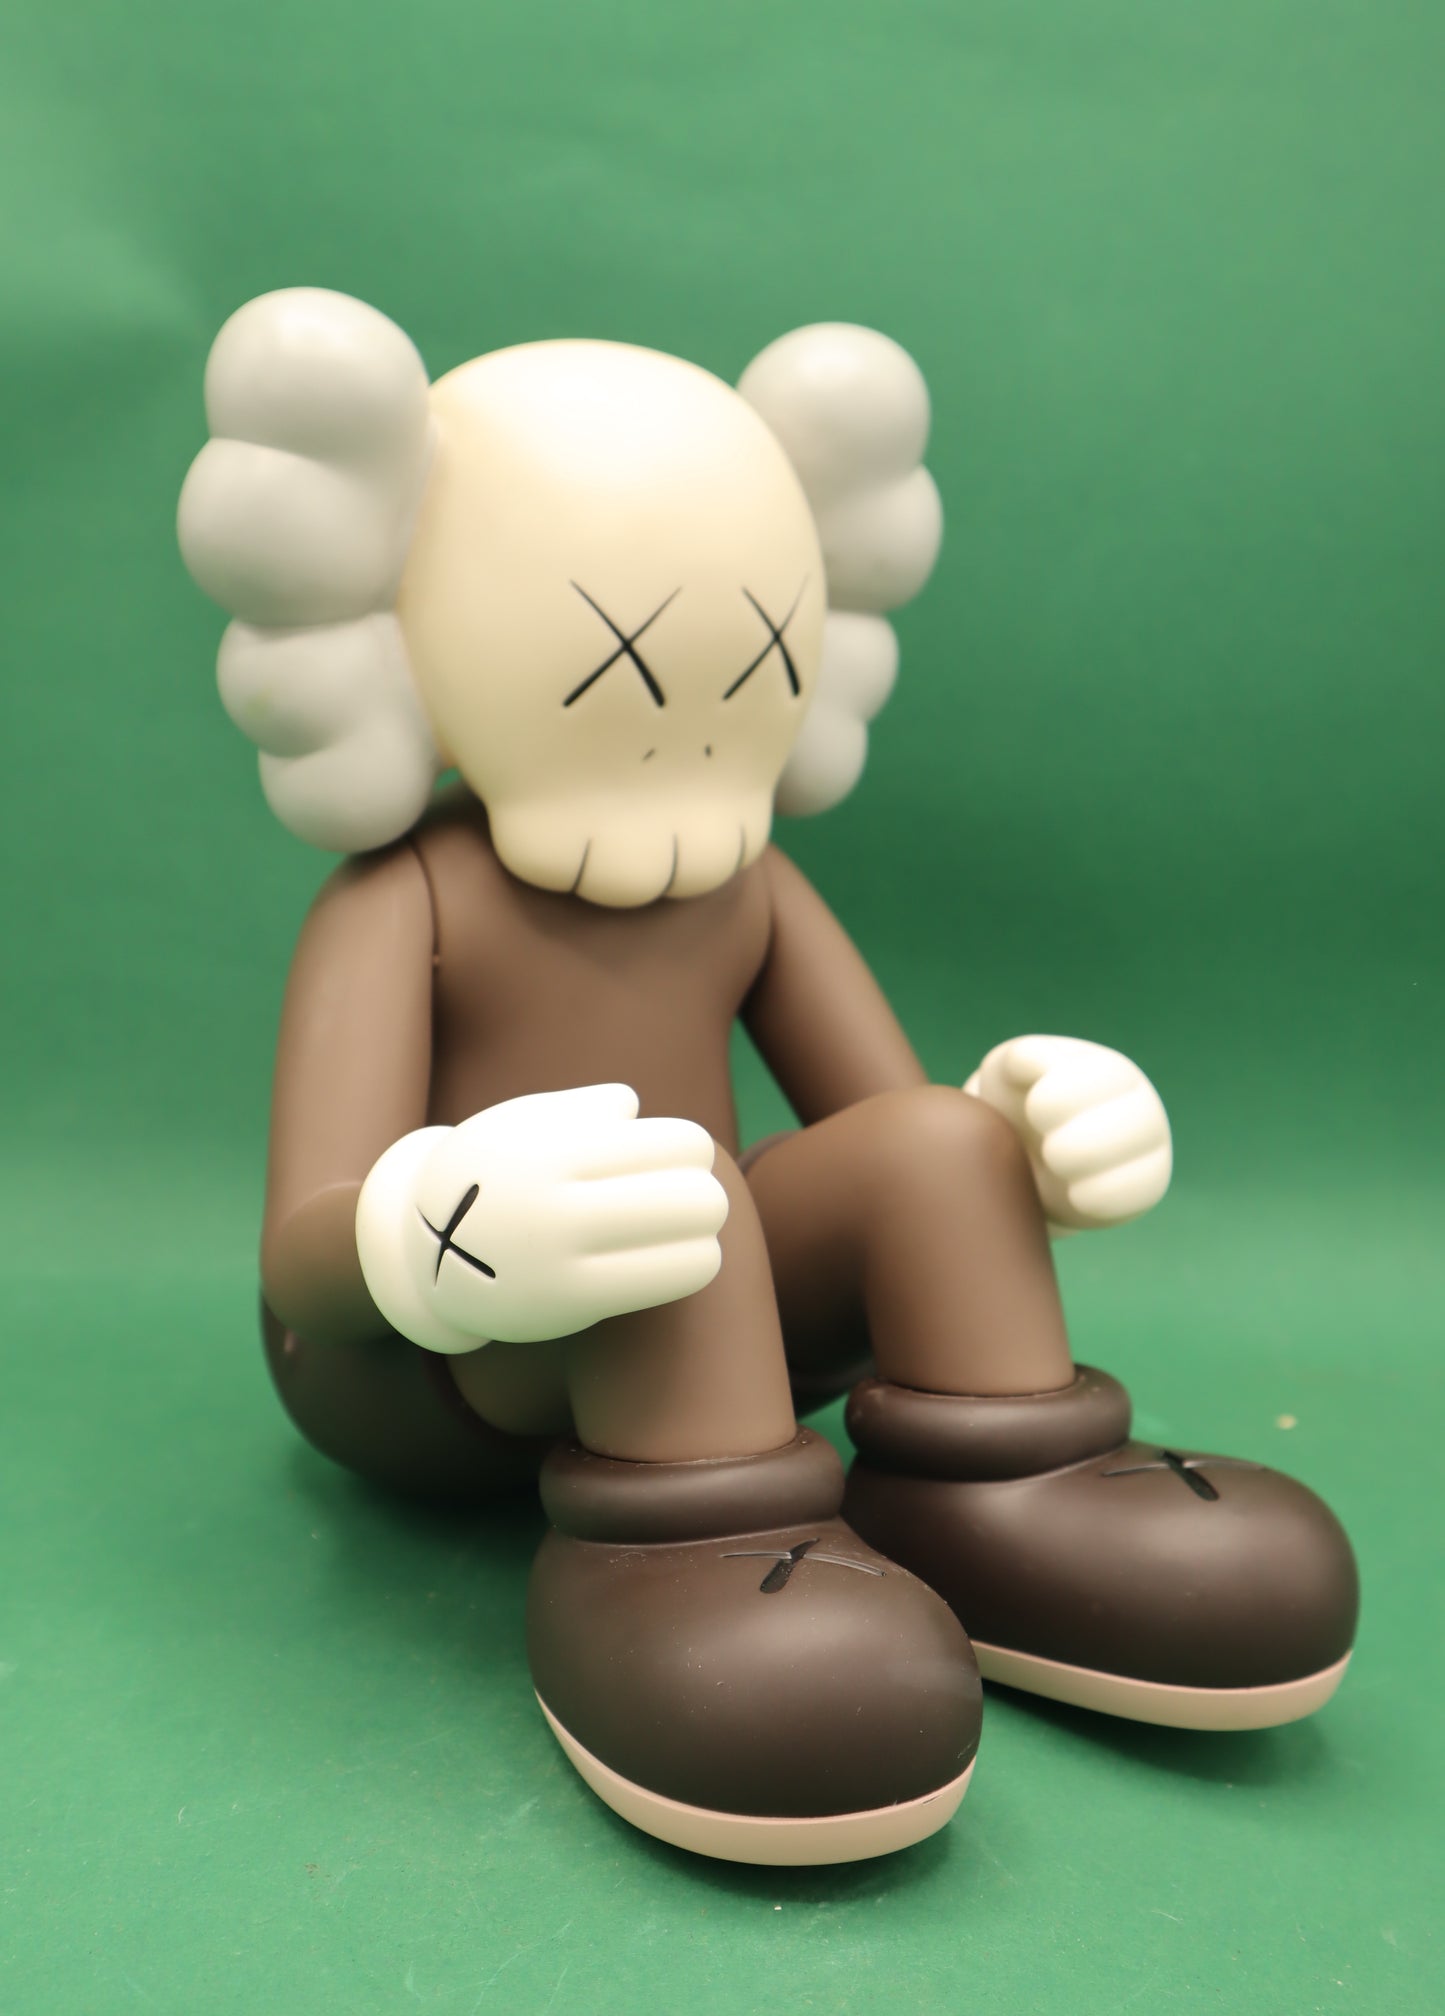 Kaws (Brian Donnelly)  Seeing/Watching Open Edition  2016